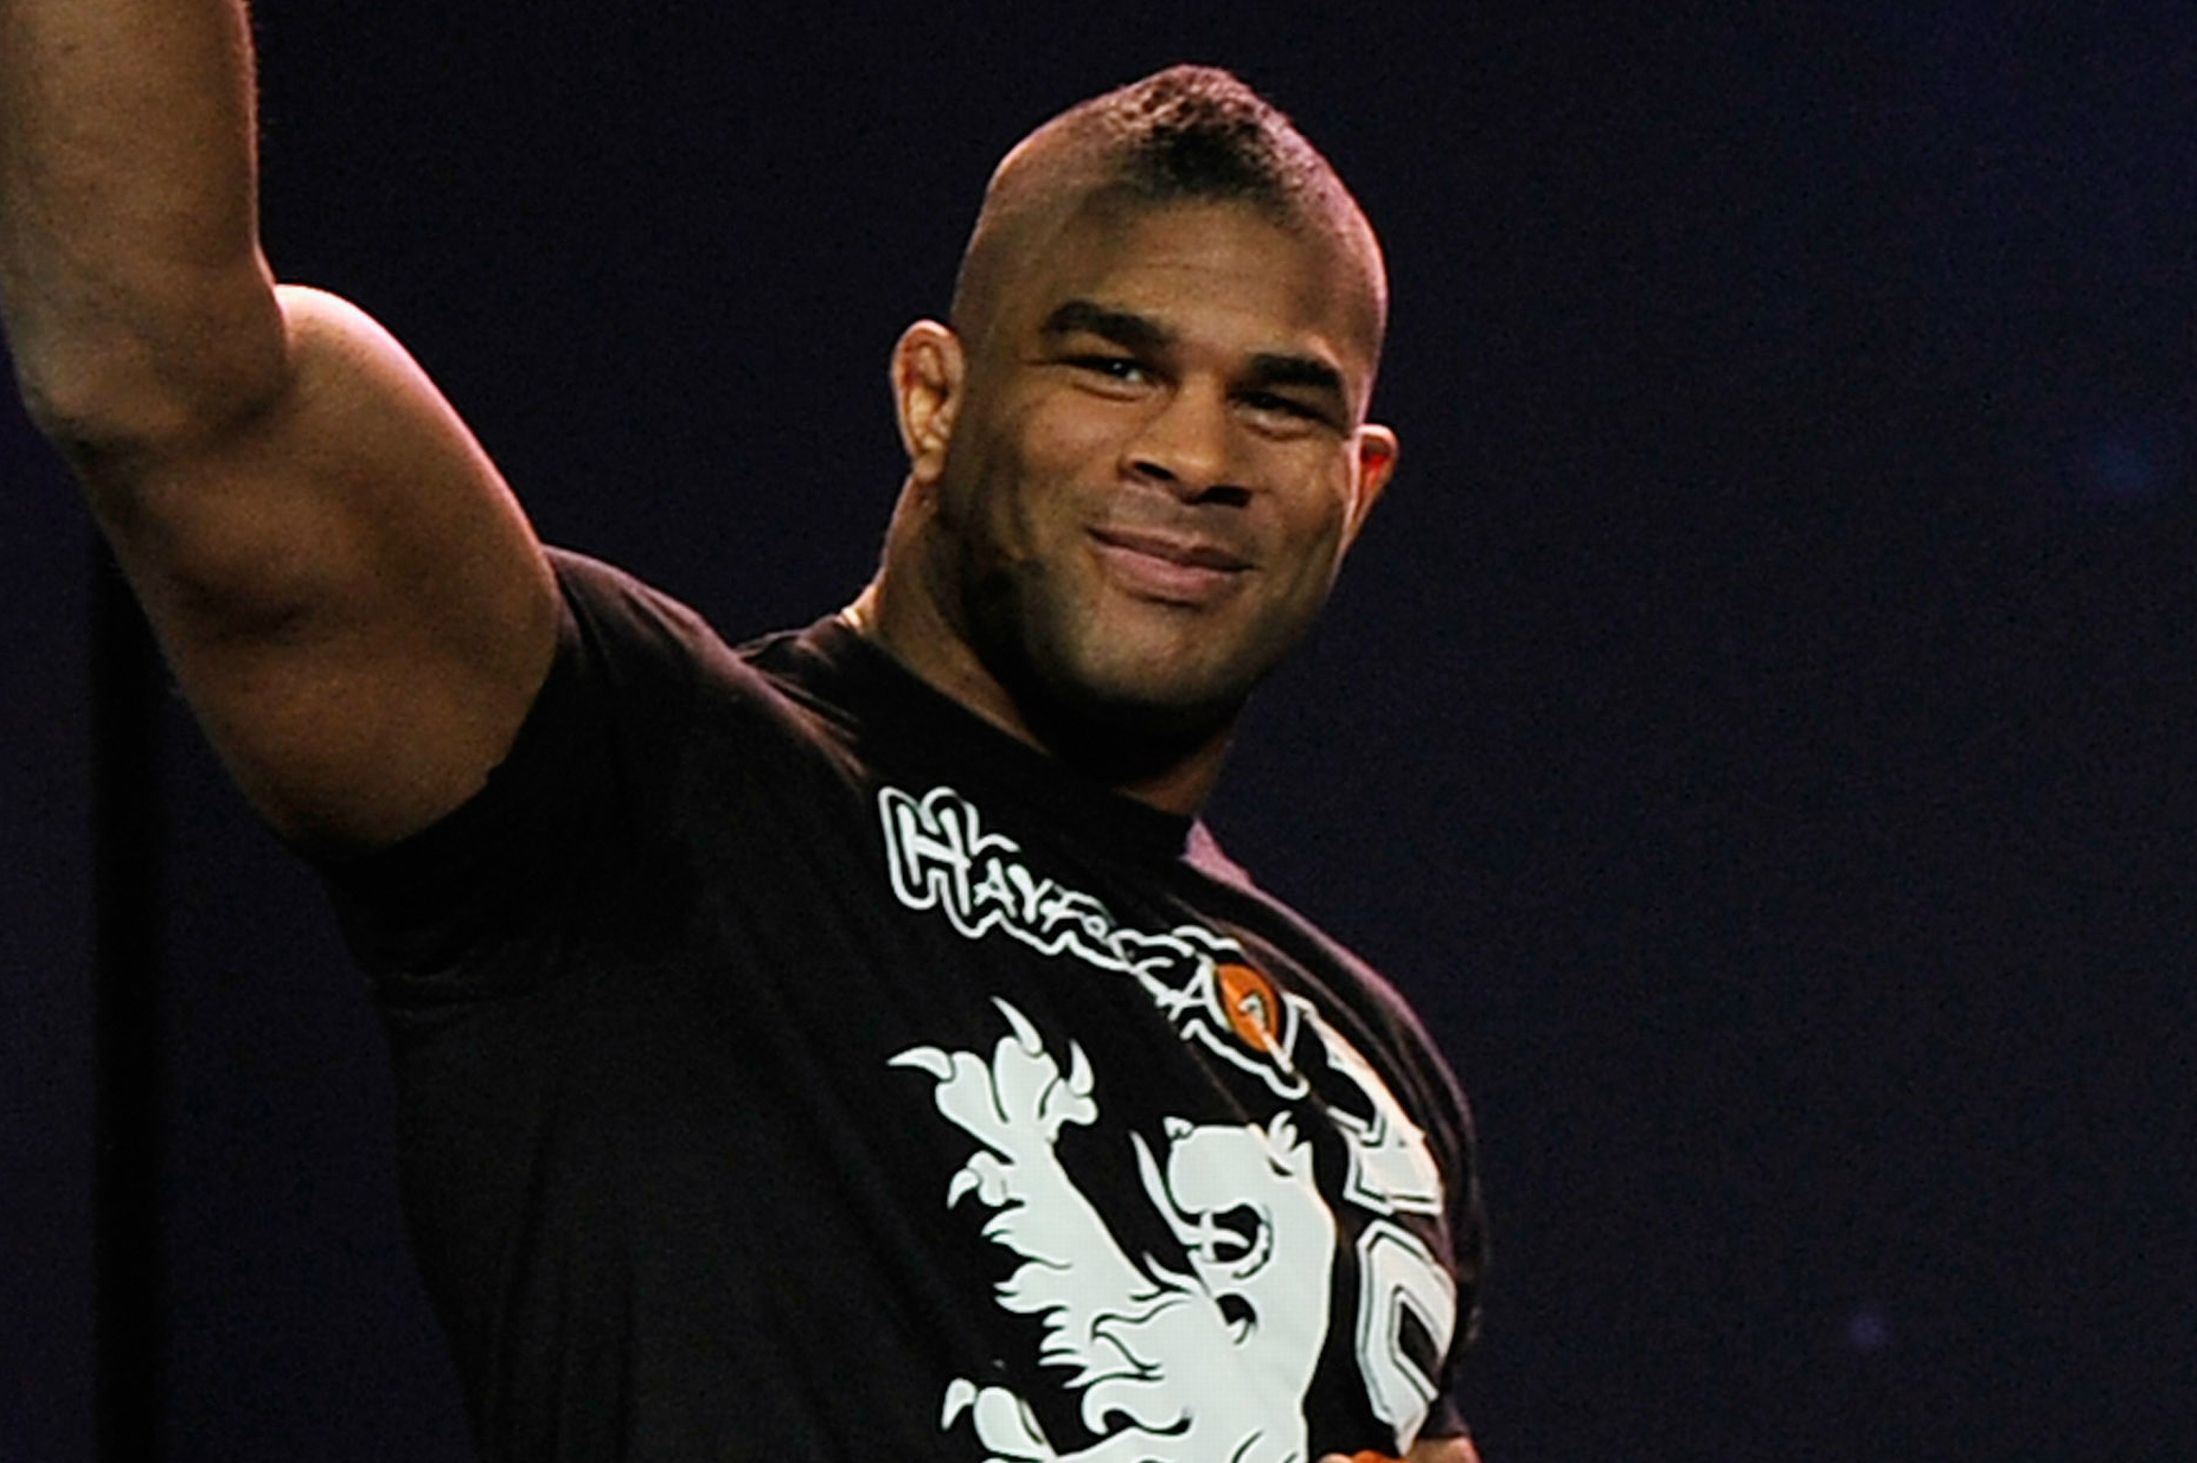 Fearless fighter Alistair Overeem wallpapers and images ...